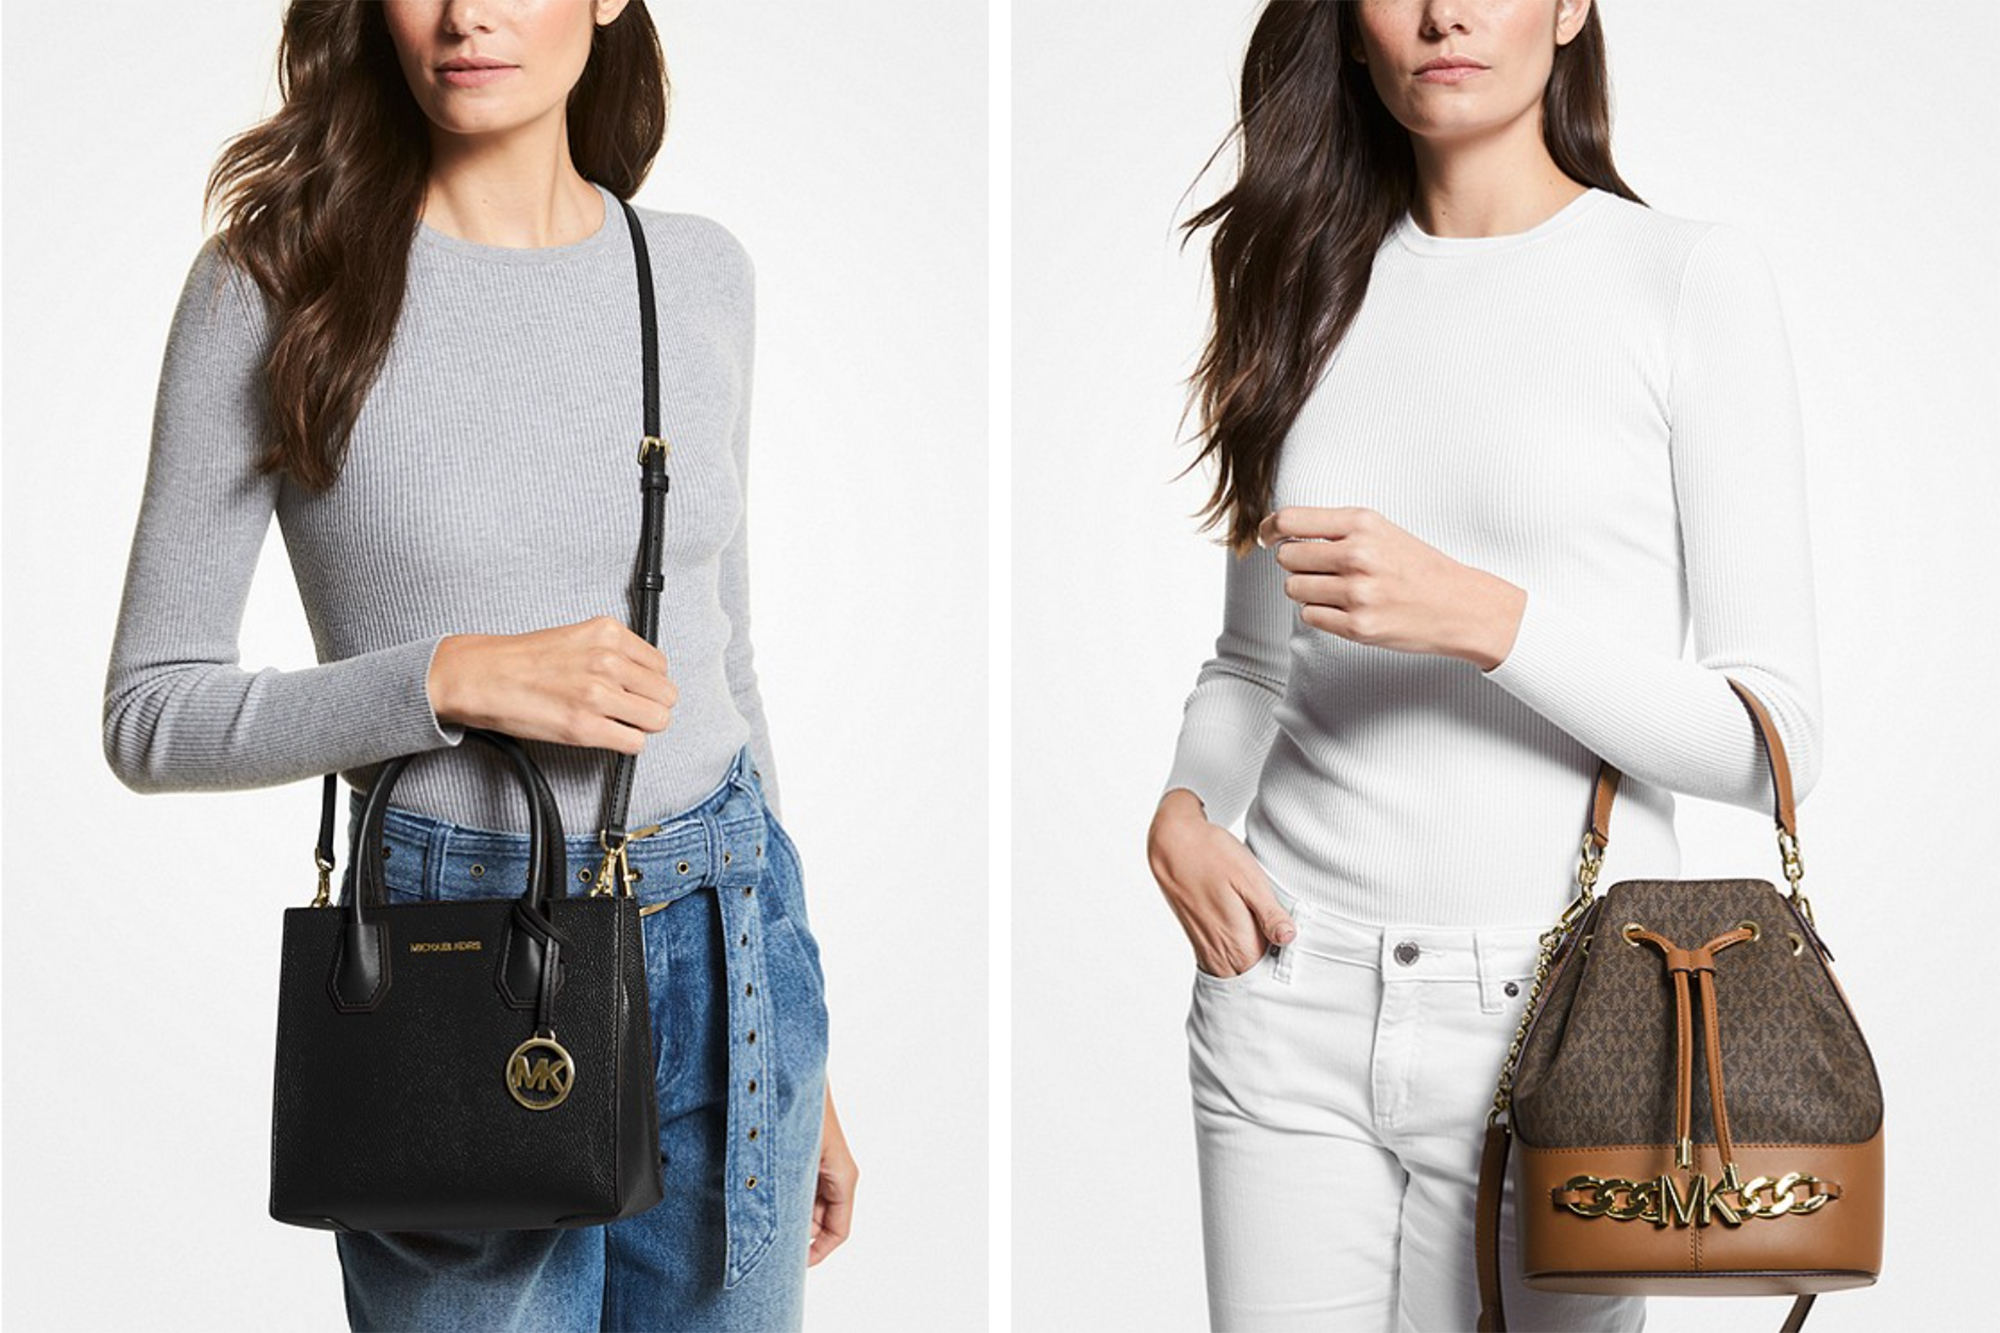 Michael Kors purse Save up to 70 on these toprated bags and more